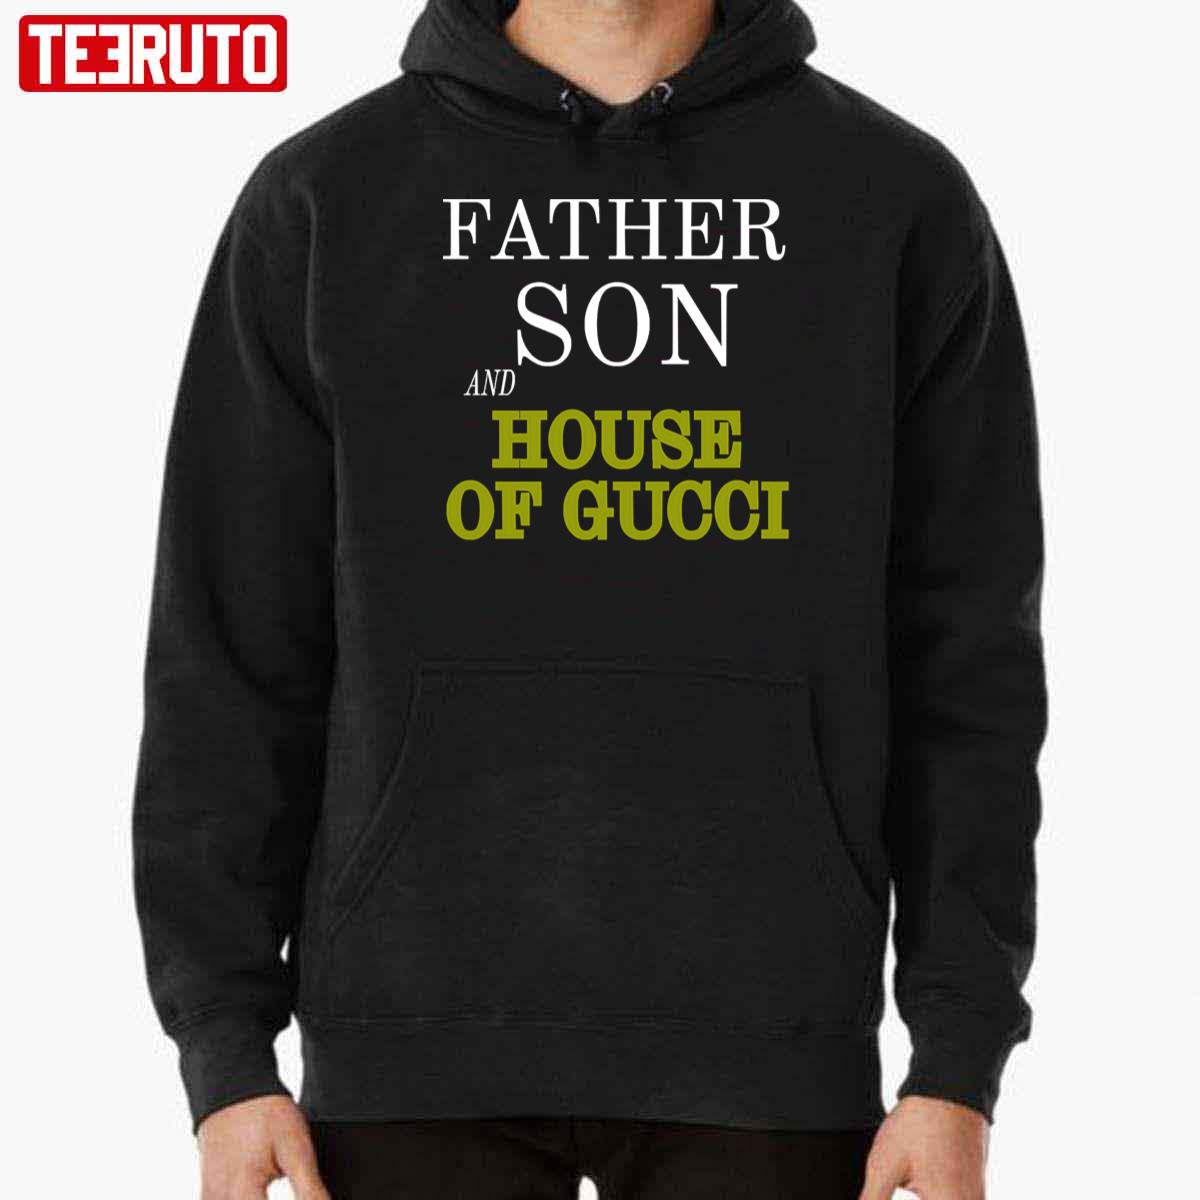 Father Son and House of Gucci Unisex T-Shirt - Teeruto